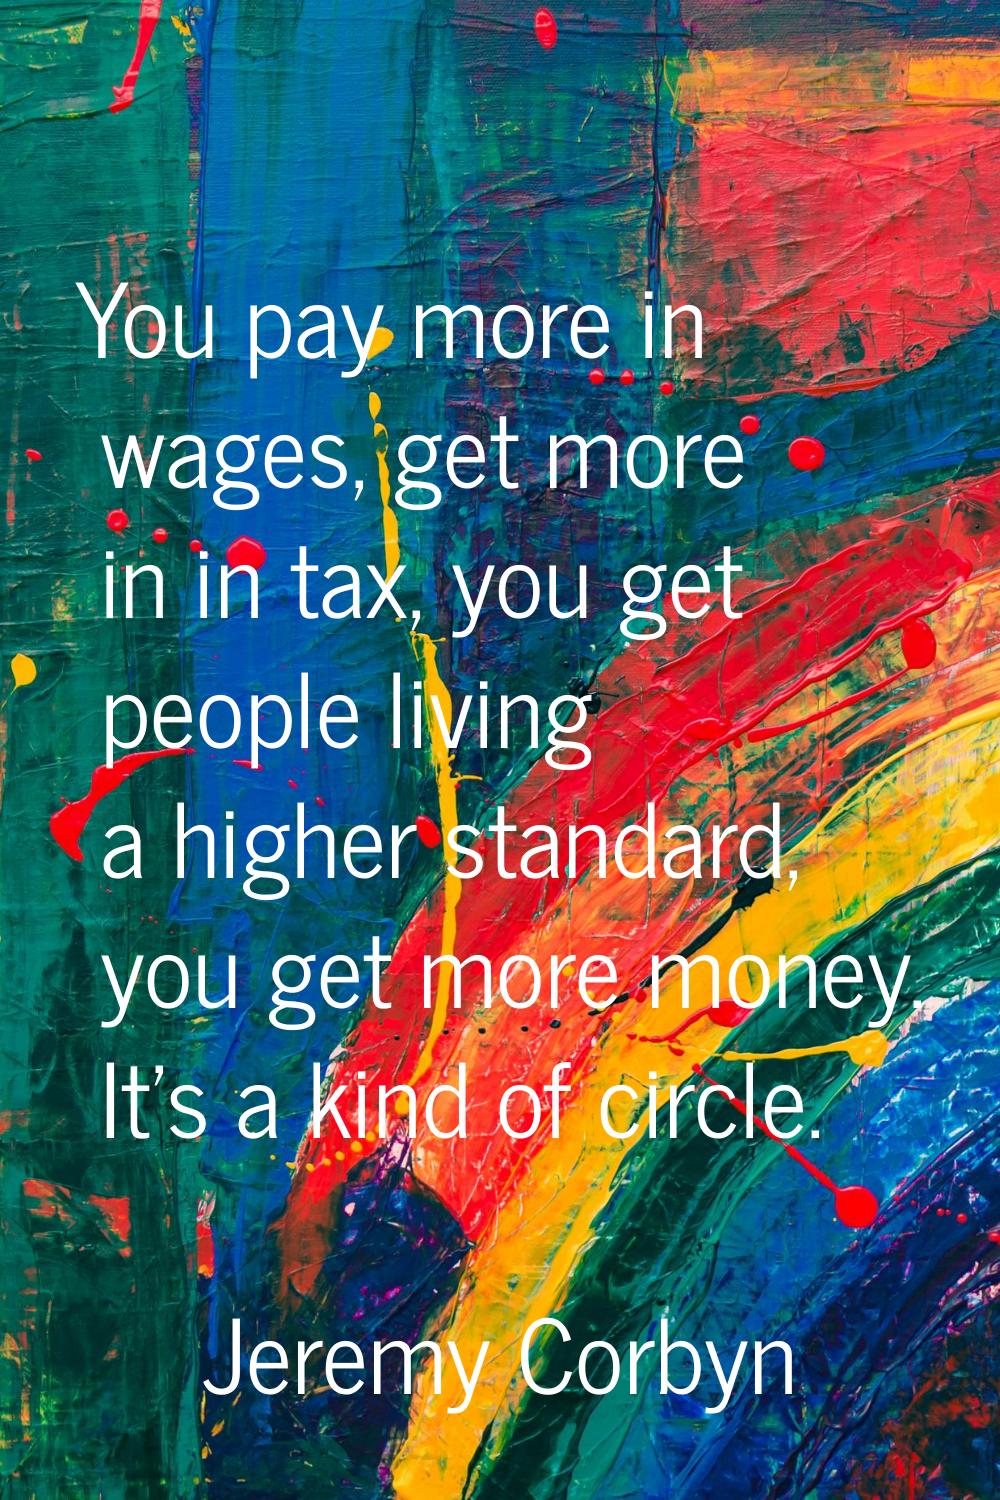 You pay more in wages, get more in in tax, you get people living a higher standard, you get more mo